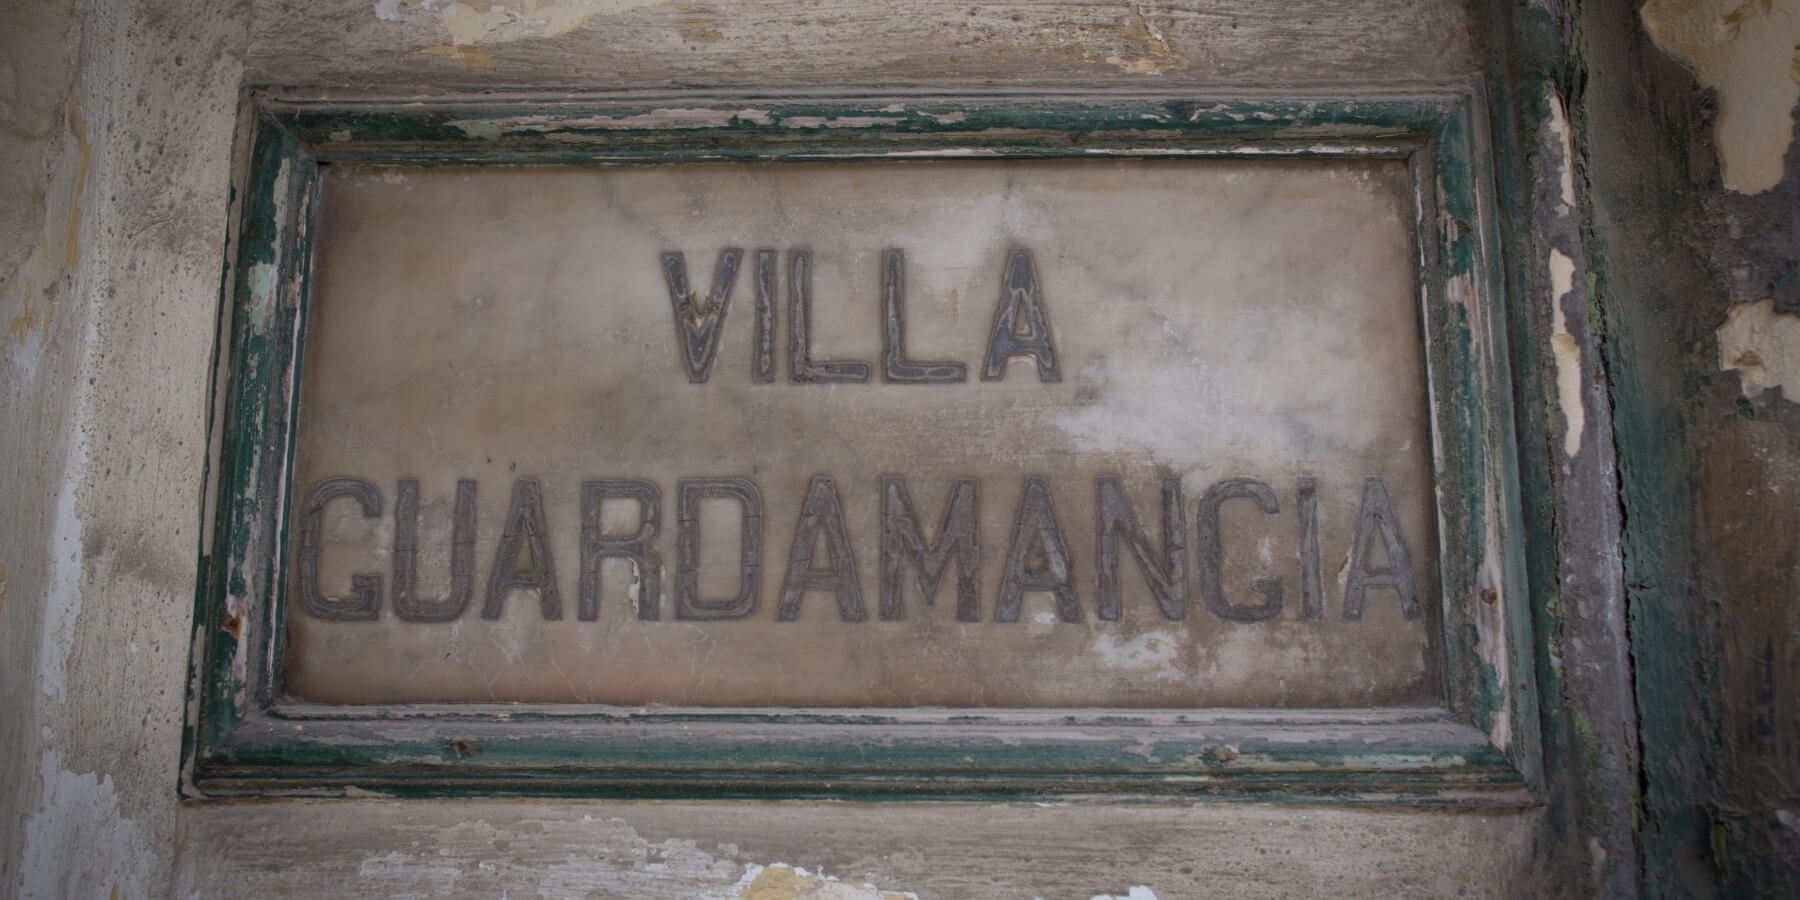 Villa Guardamangia is the former residence of Queen Elizabeth which is now in disrepair.